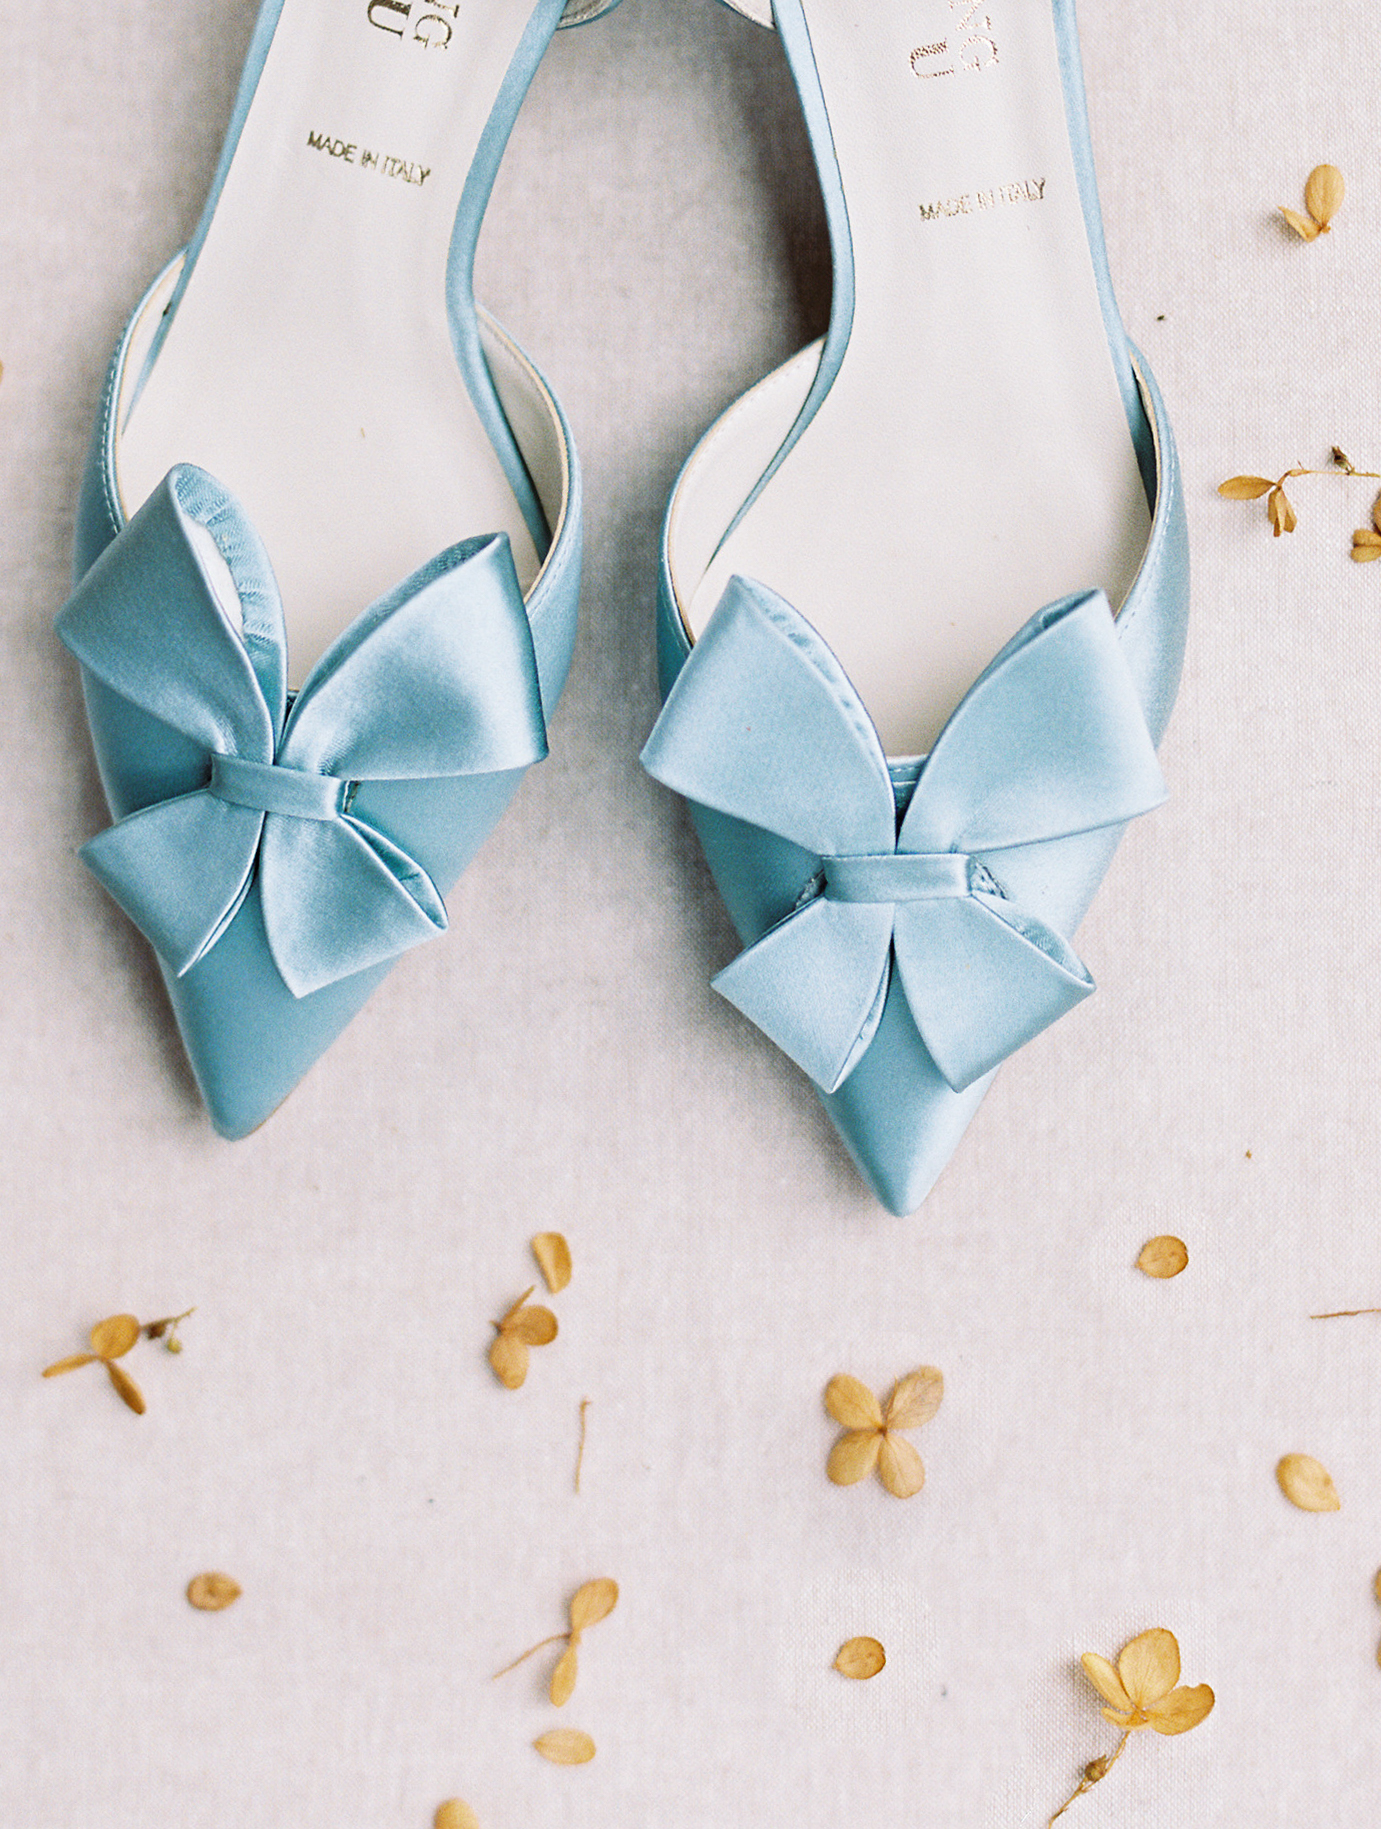 blue wedding shoes on tan mat with yellow flowers